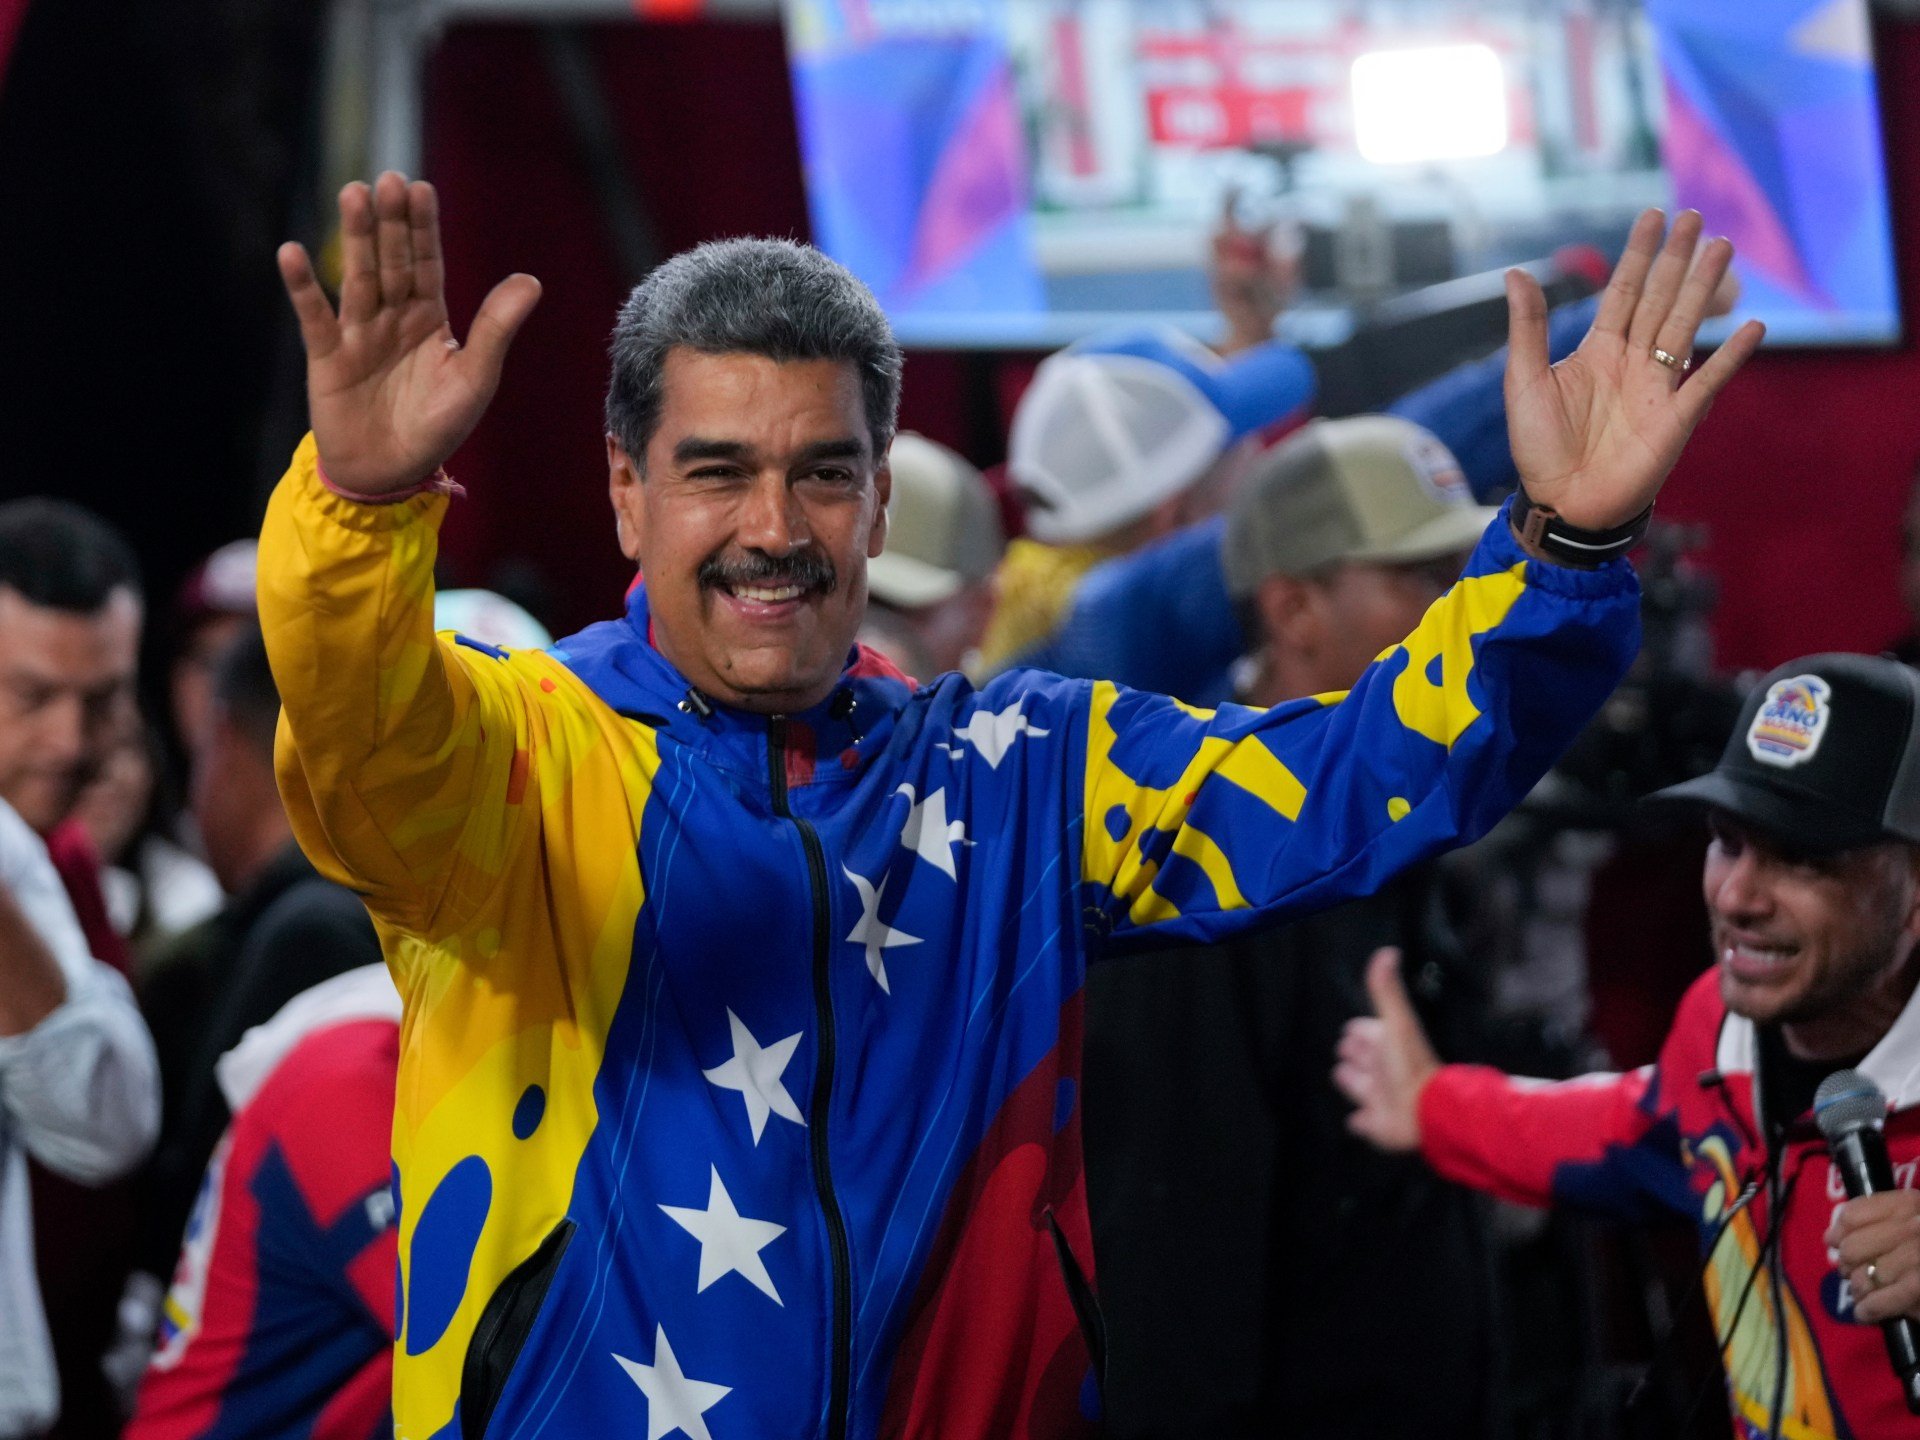 Maduro claims victory in disputed Venezuela election results: What’s next?